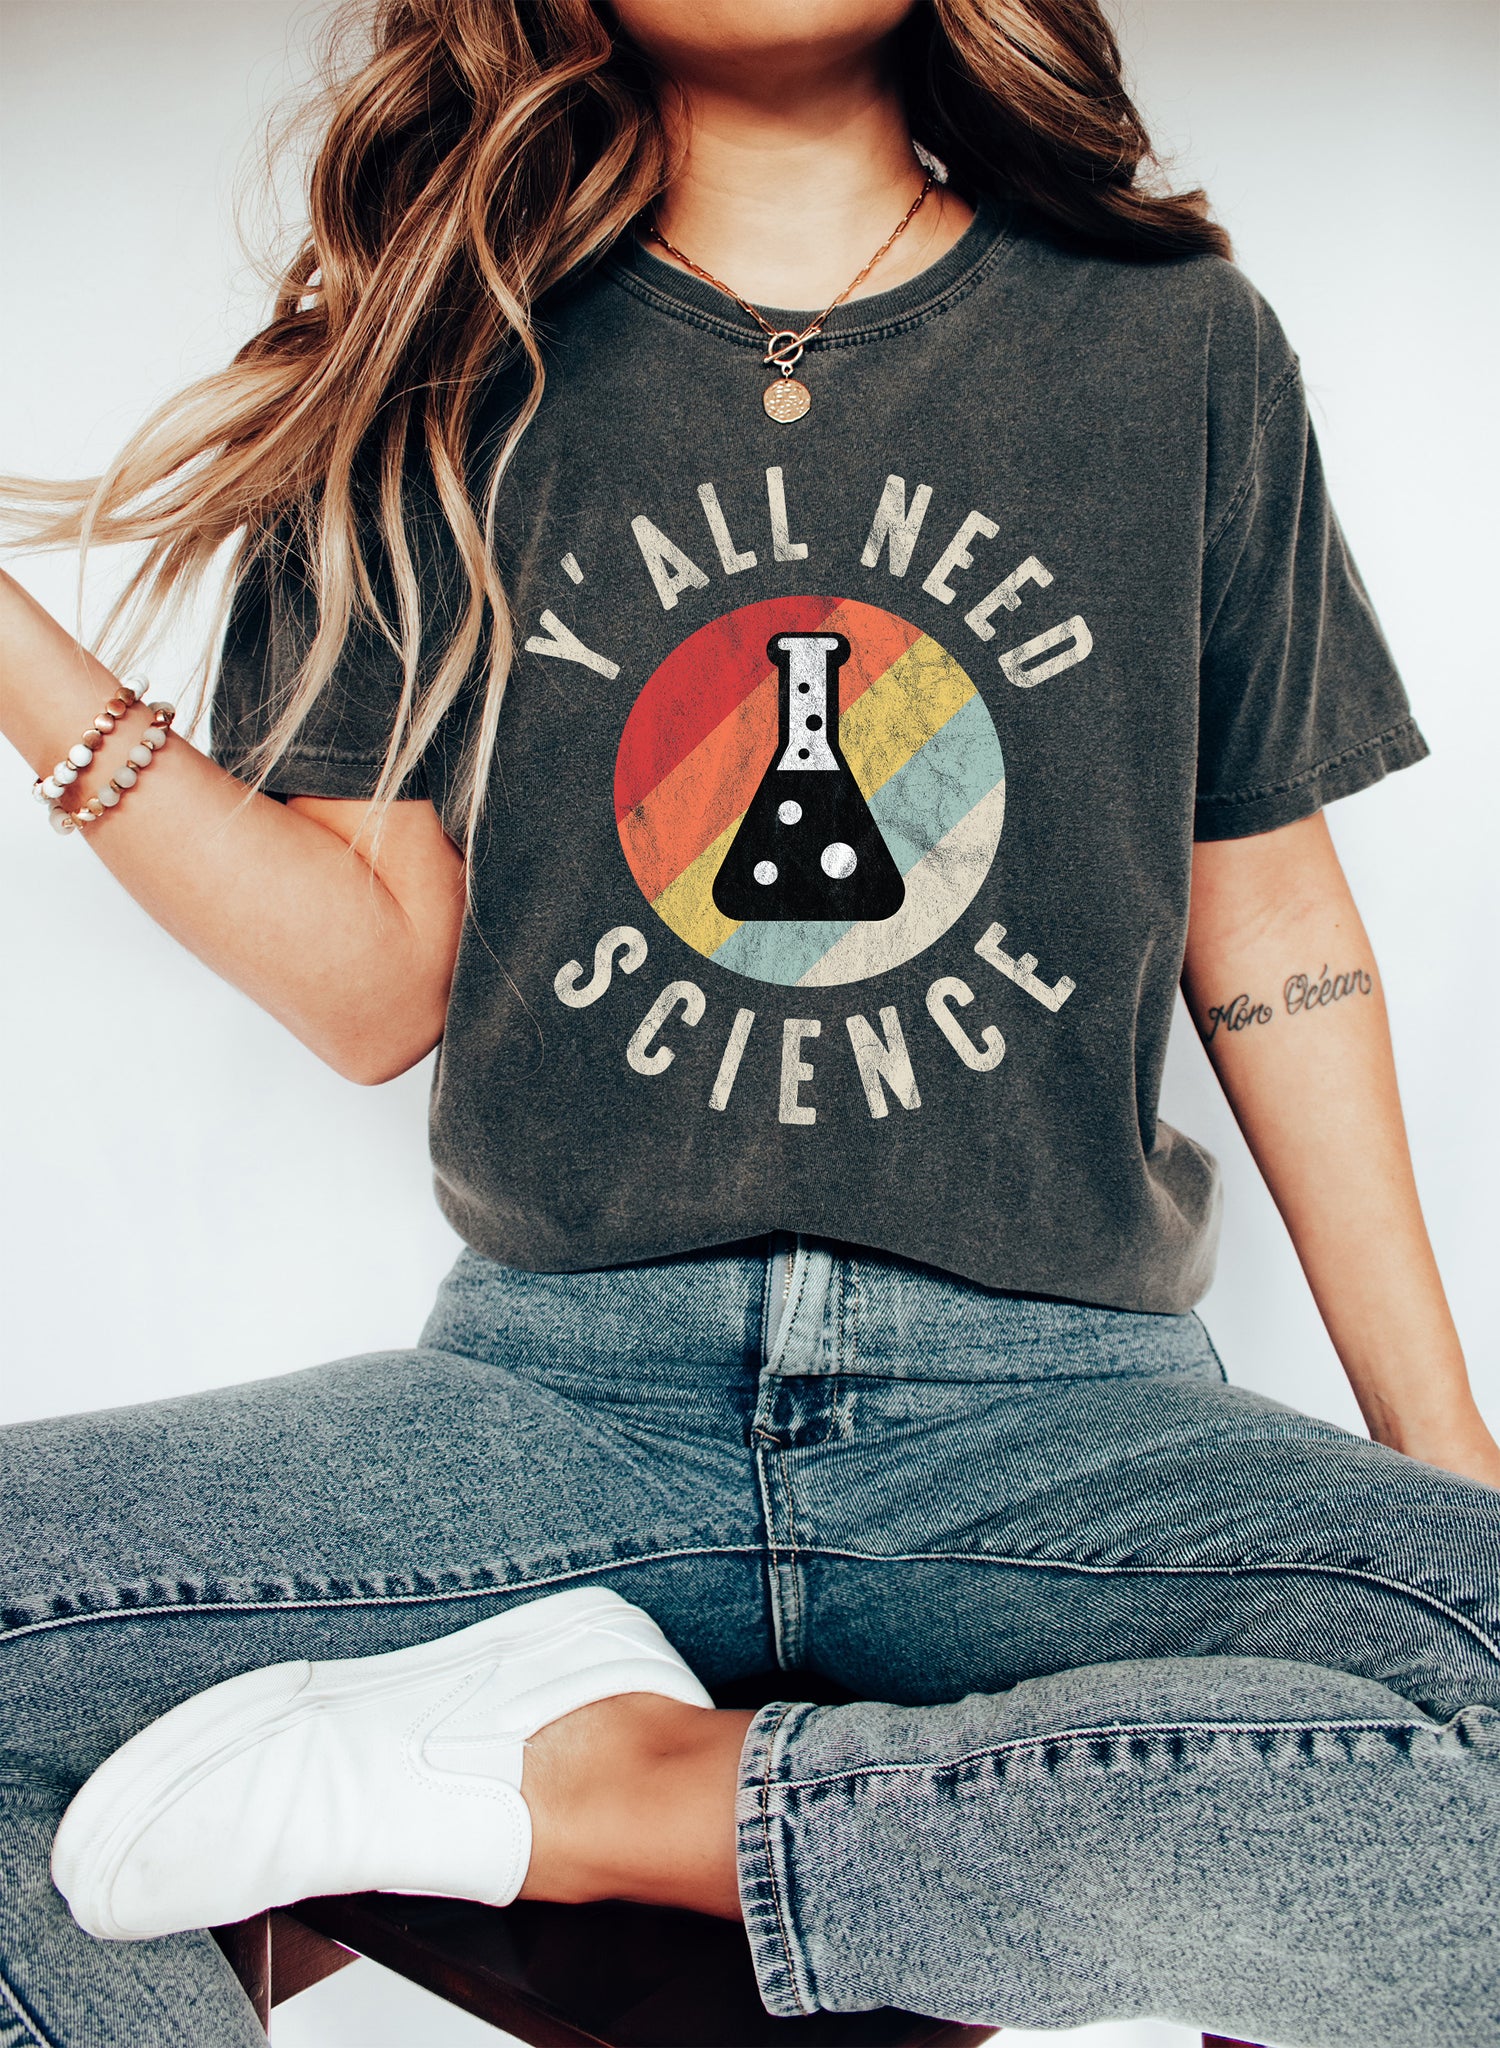 Y'all Need Science Funny Science WH T-Shirt